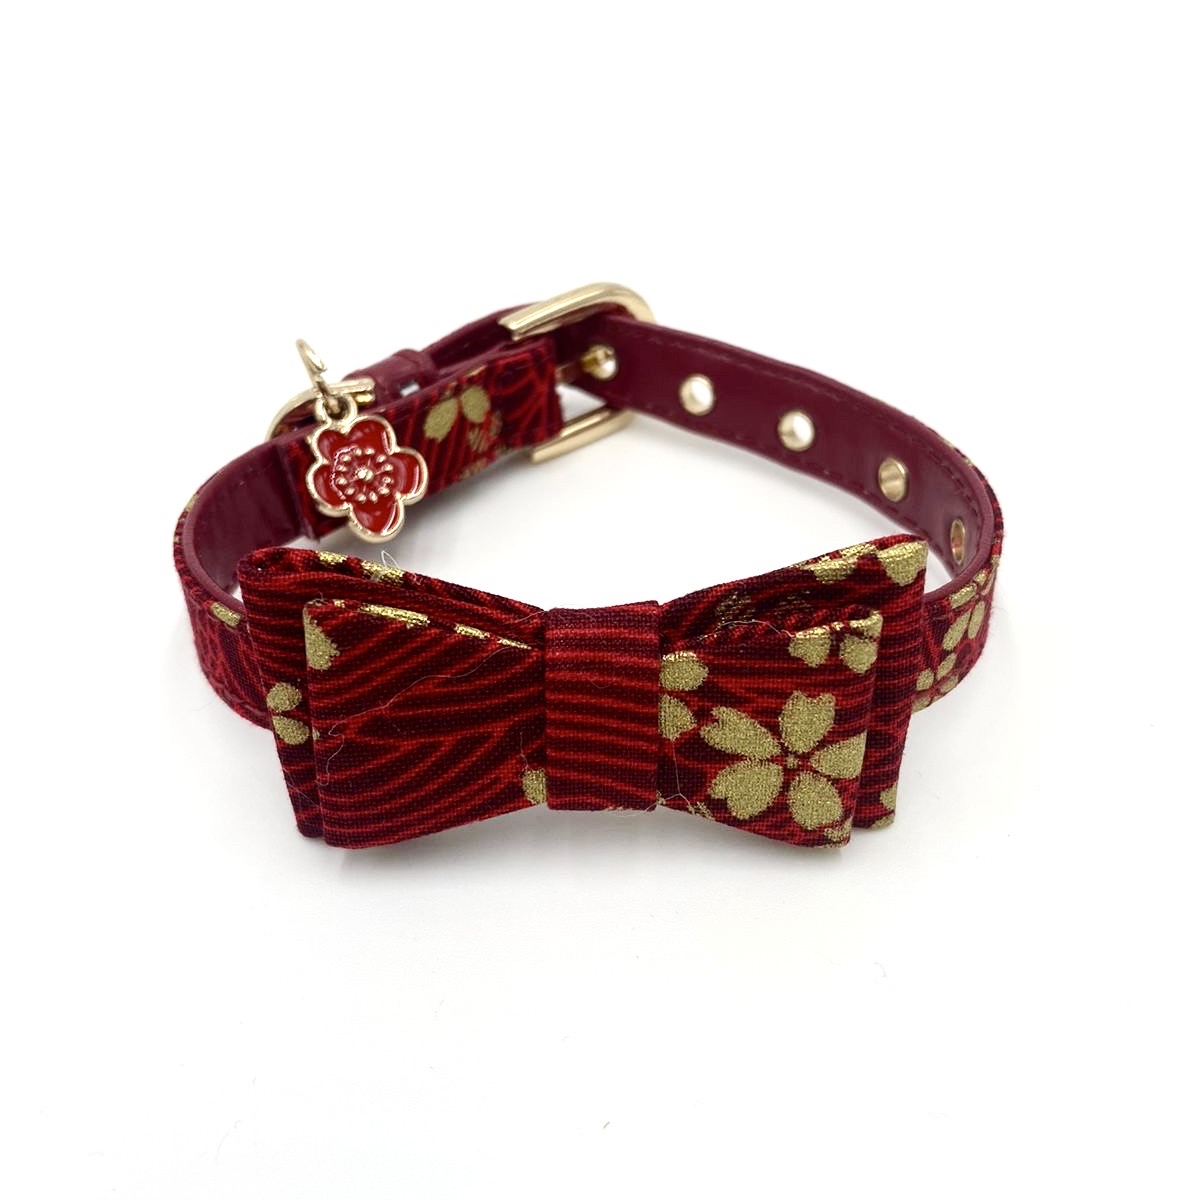 Adjustable Red and Gold Floral Bow Tie Collar